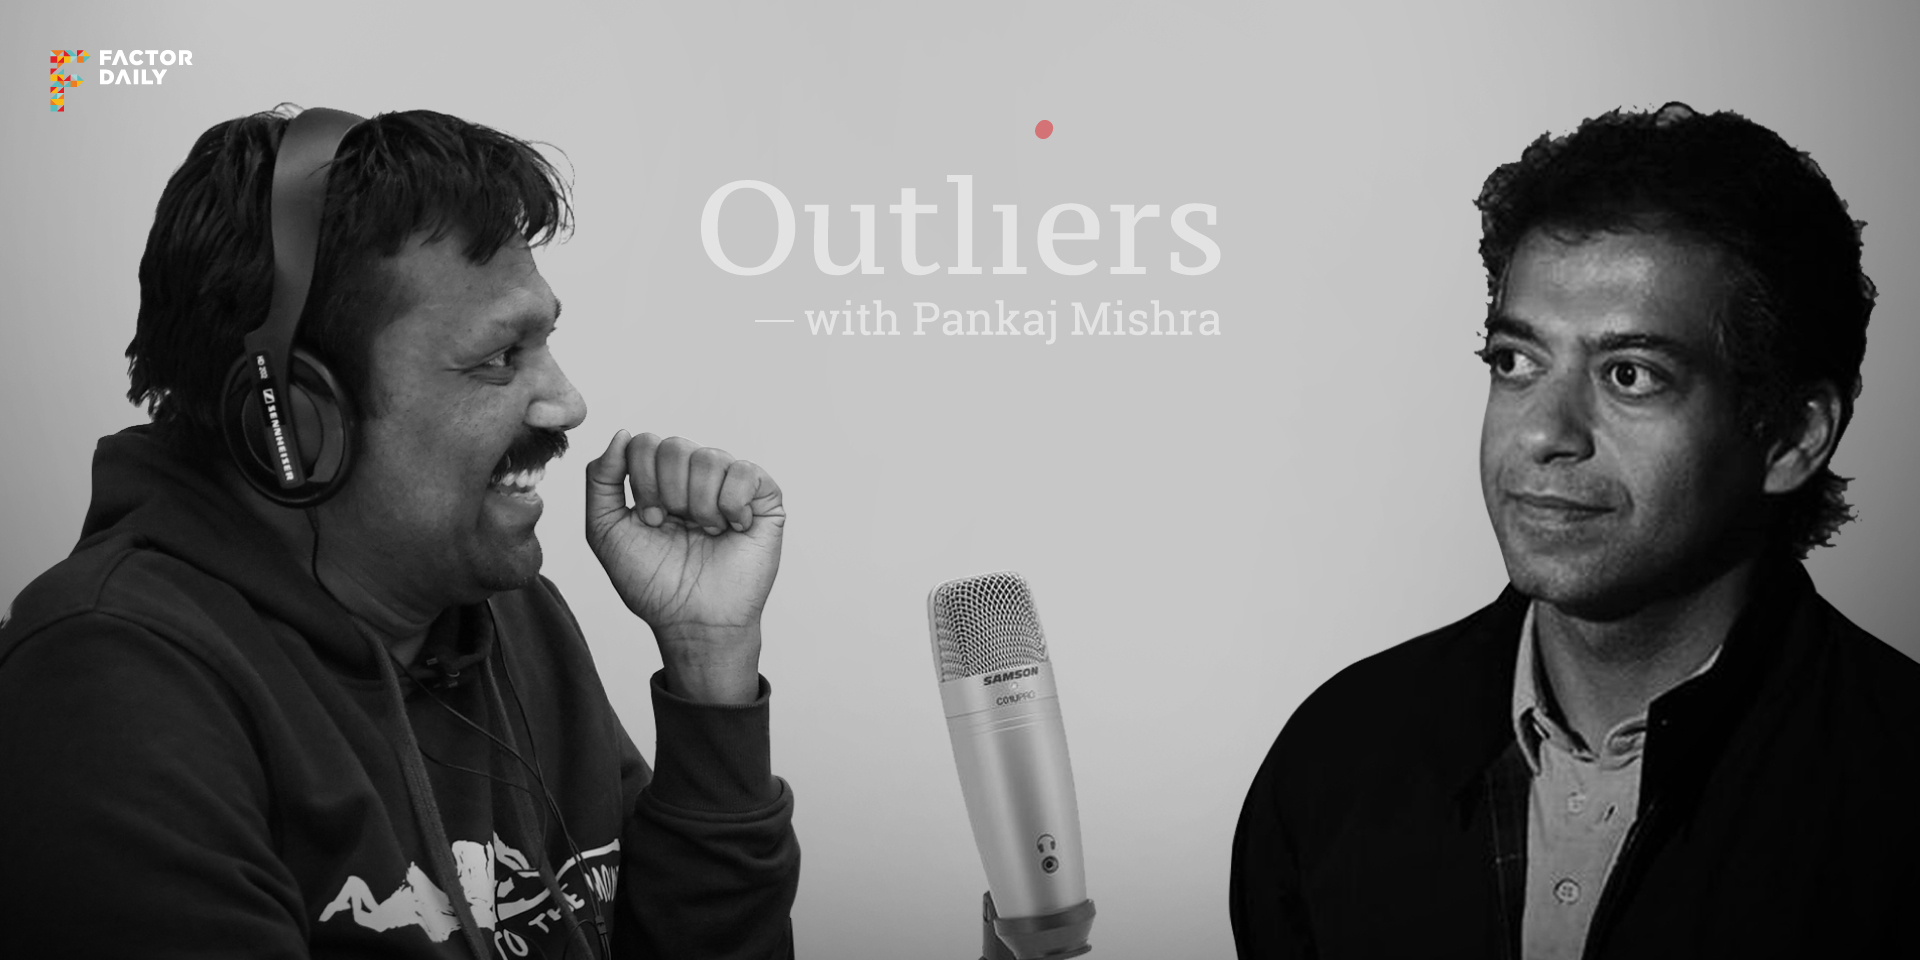 The Outliers 6: Naval Ravikant, a monk in the Valley, tells us